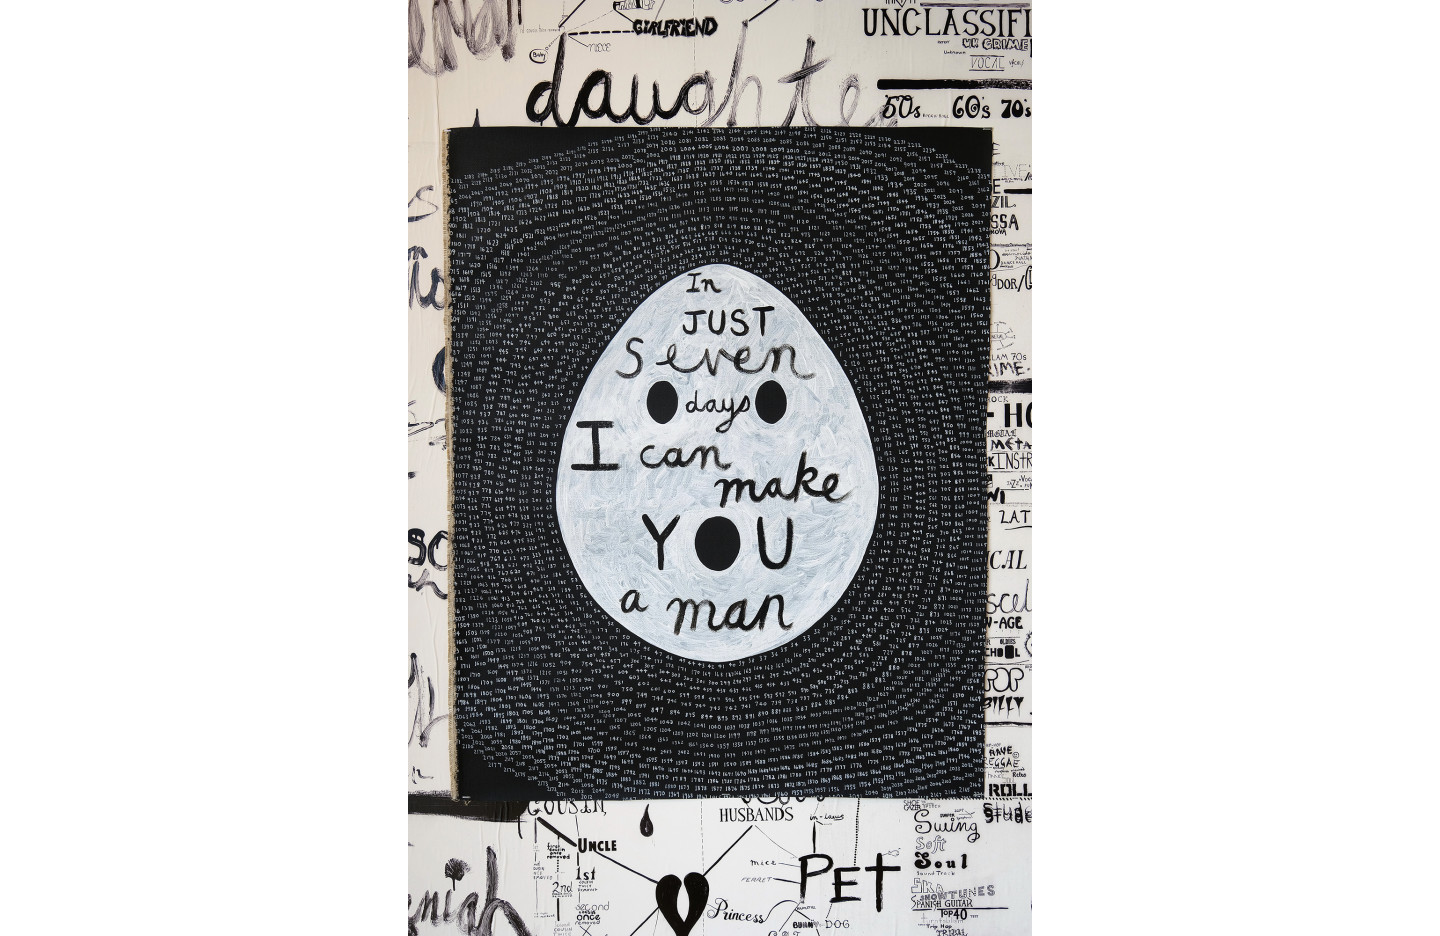 In JUST seven days I can make YOU a man (2017), Nell, Ramp Gallery